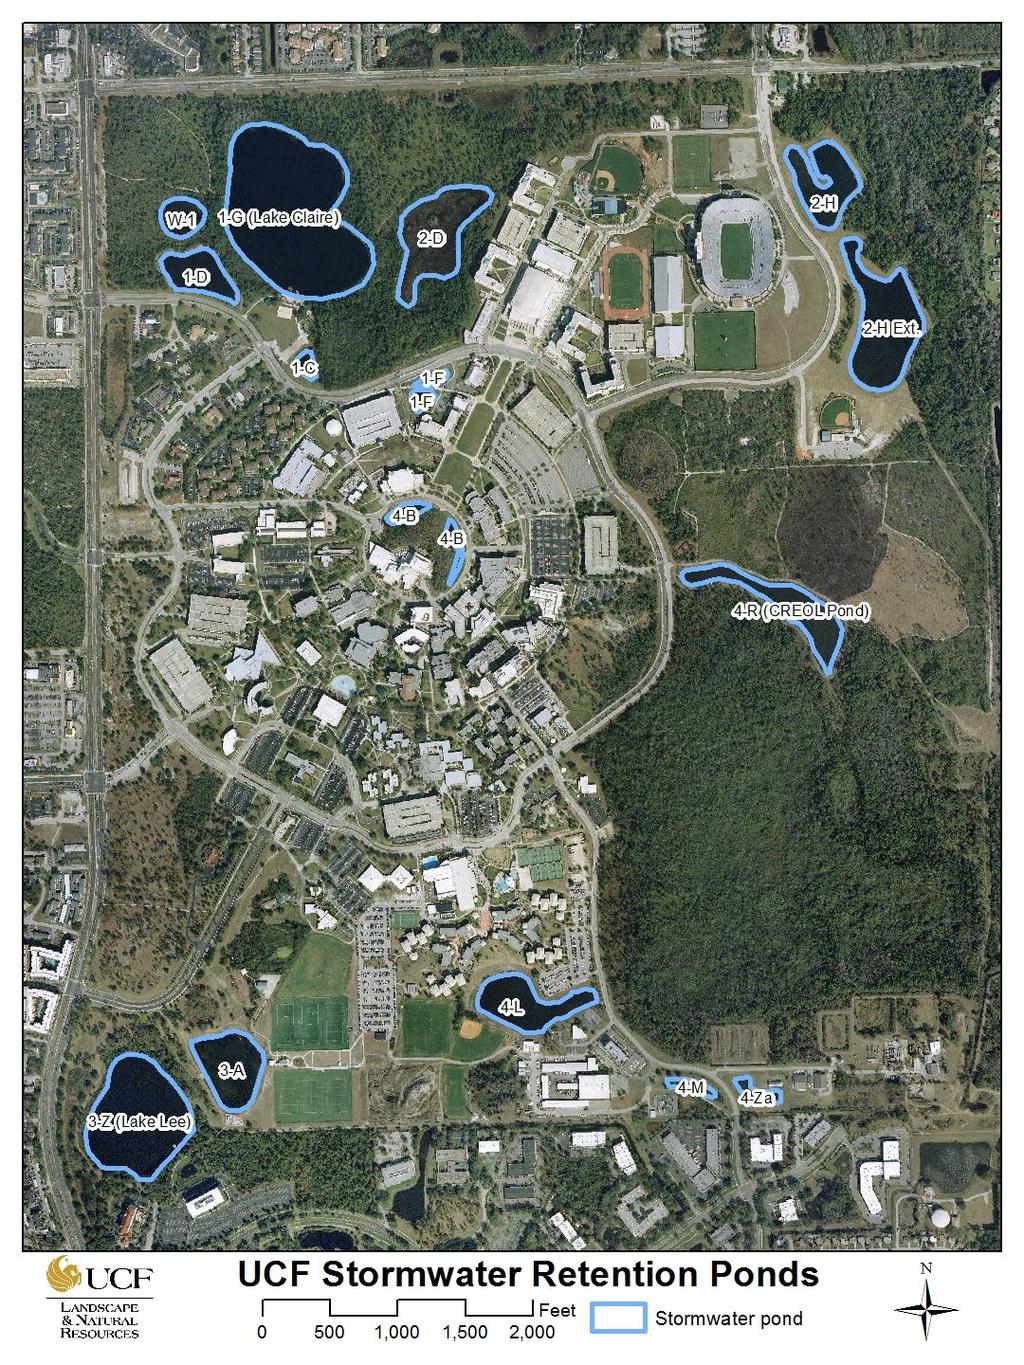 Case Study 2 University of Central Florida Water shed with more than 10 pond systems. Stormwater that enters drainage is released in Little Econlockhatchee River (north).